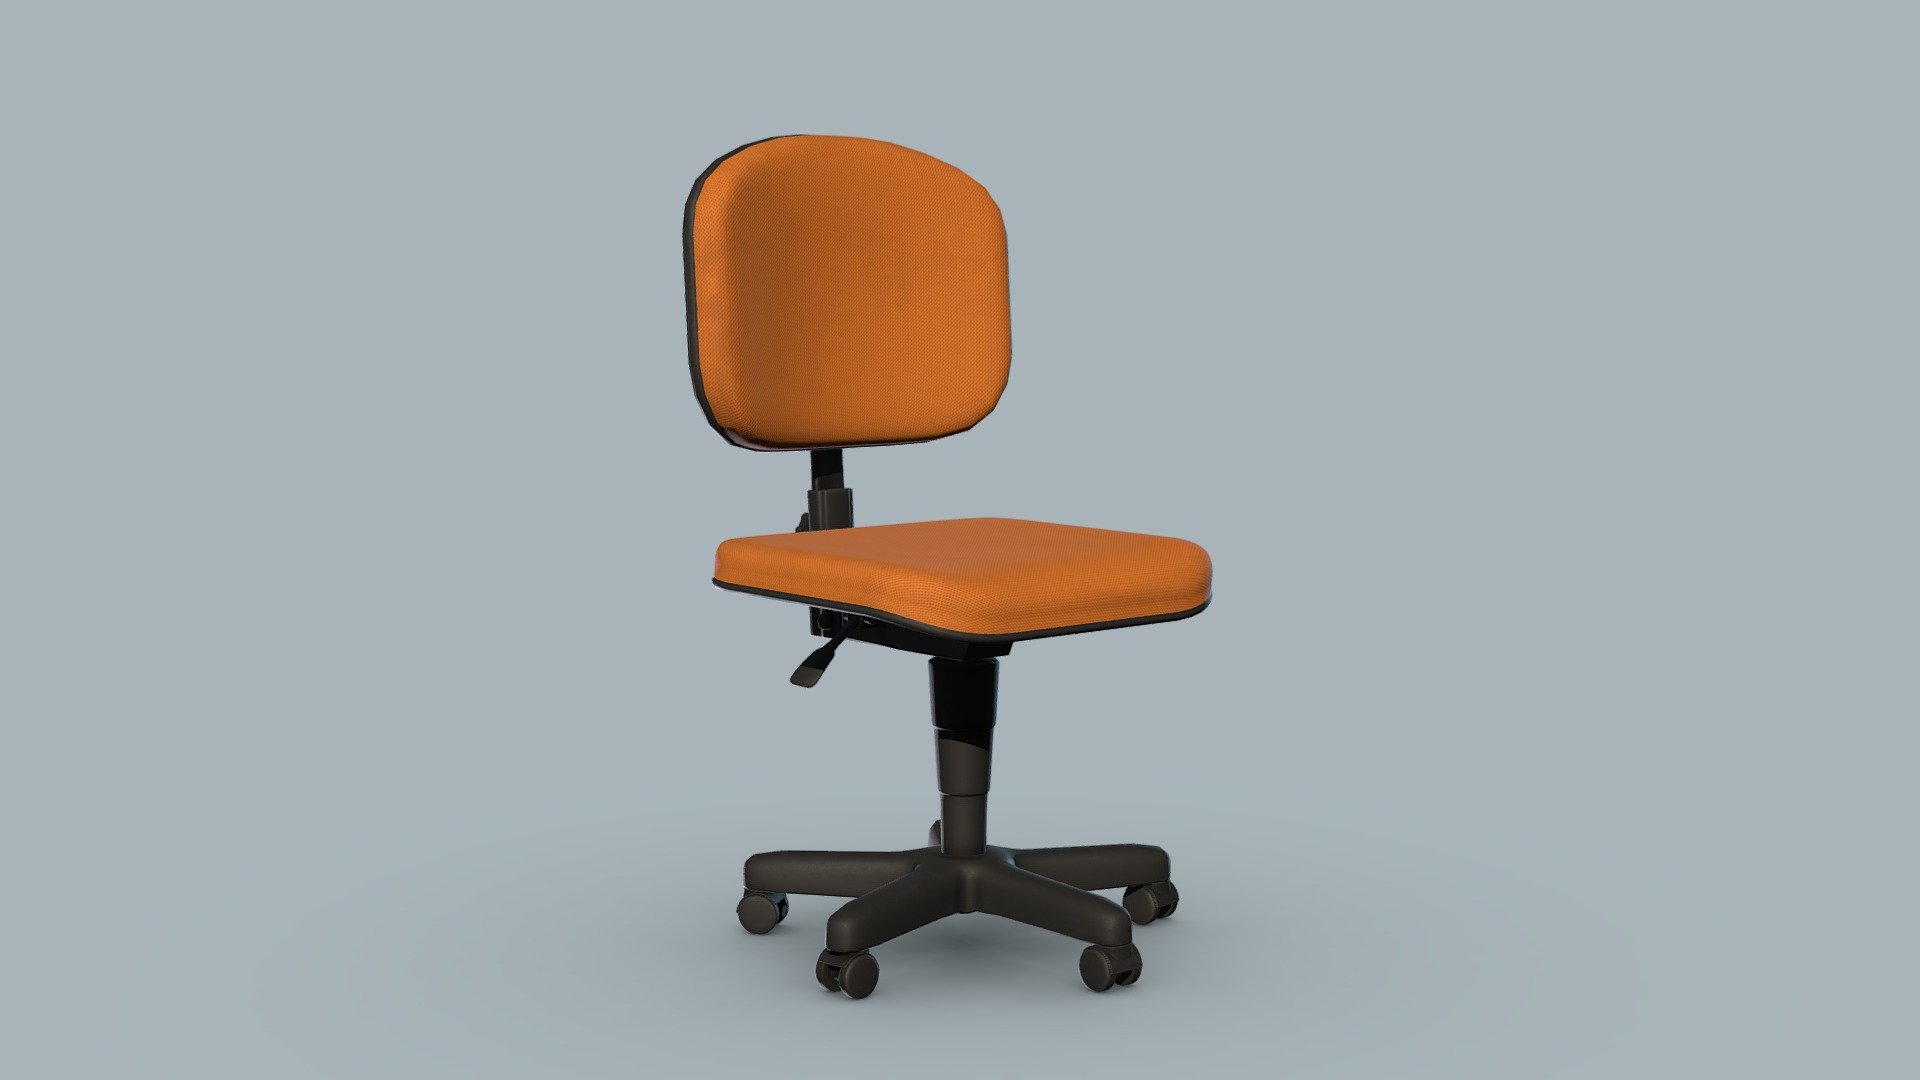 Low poly office chair with detailed textures.
Ideal to be used as a prop for real-time applications like games and VR.

Model has 5302 polygons annt 5511 vertices.

Single object with single UV map.

All textures are 4k resolution and include:
base color, roughness, normal map, matallic, ambient occlusion 3d model